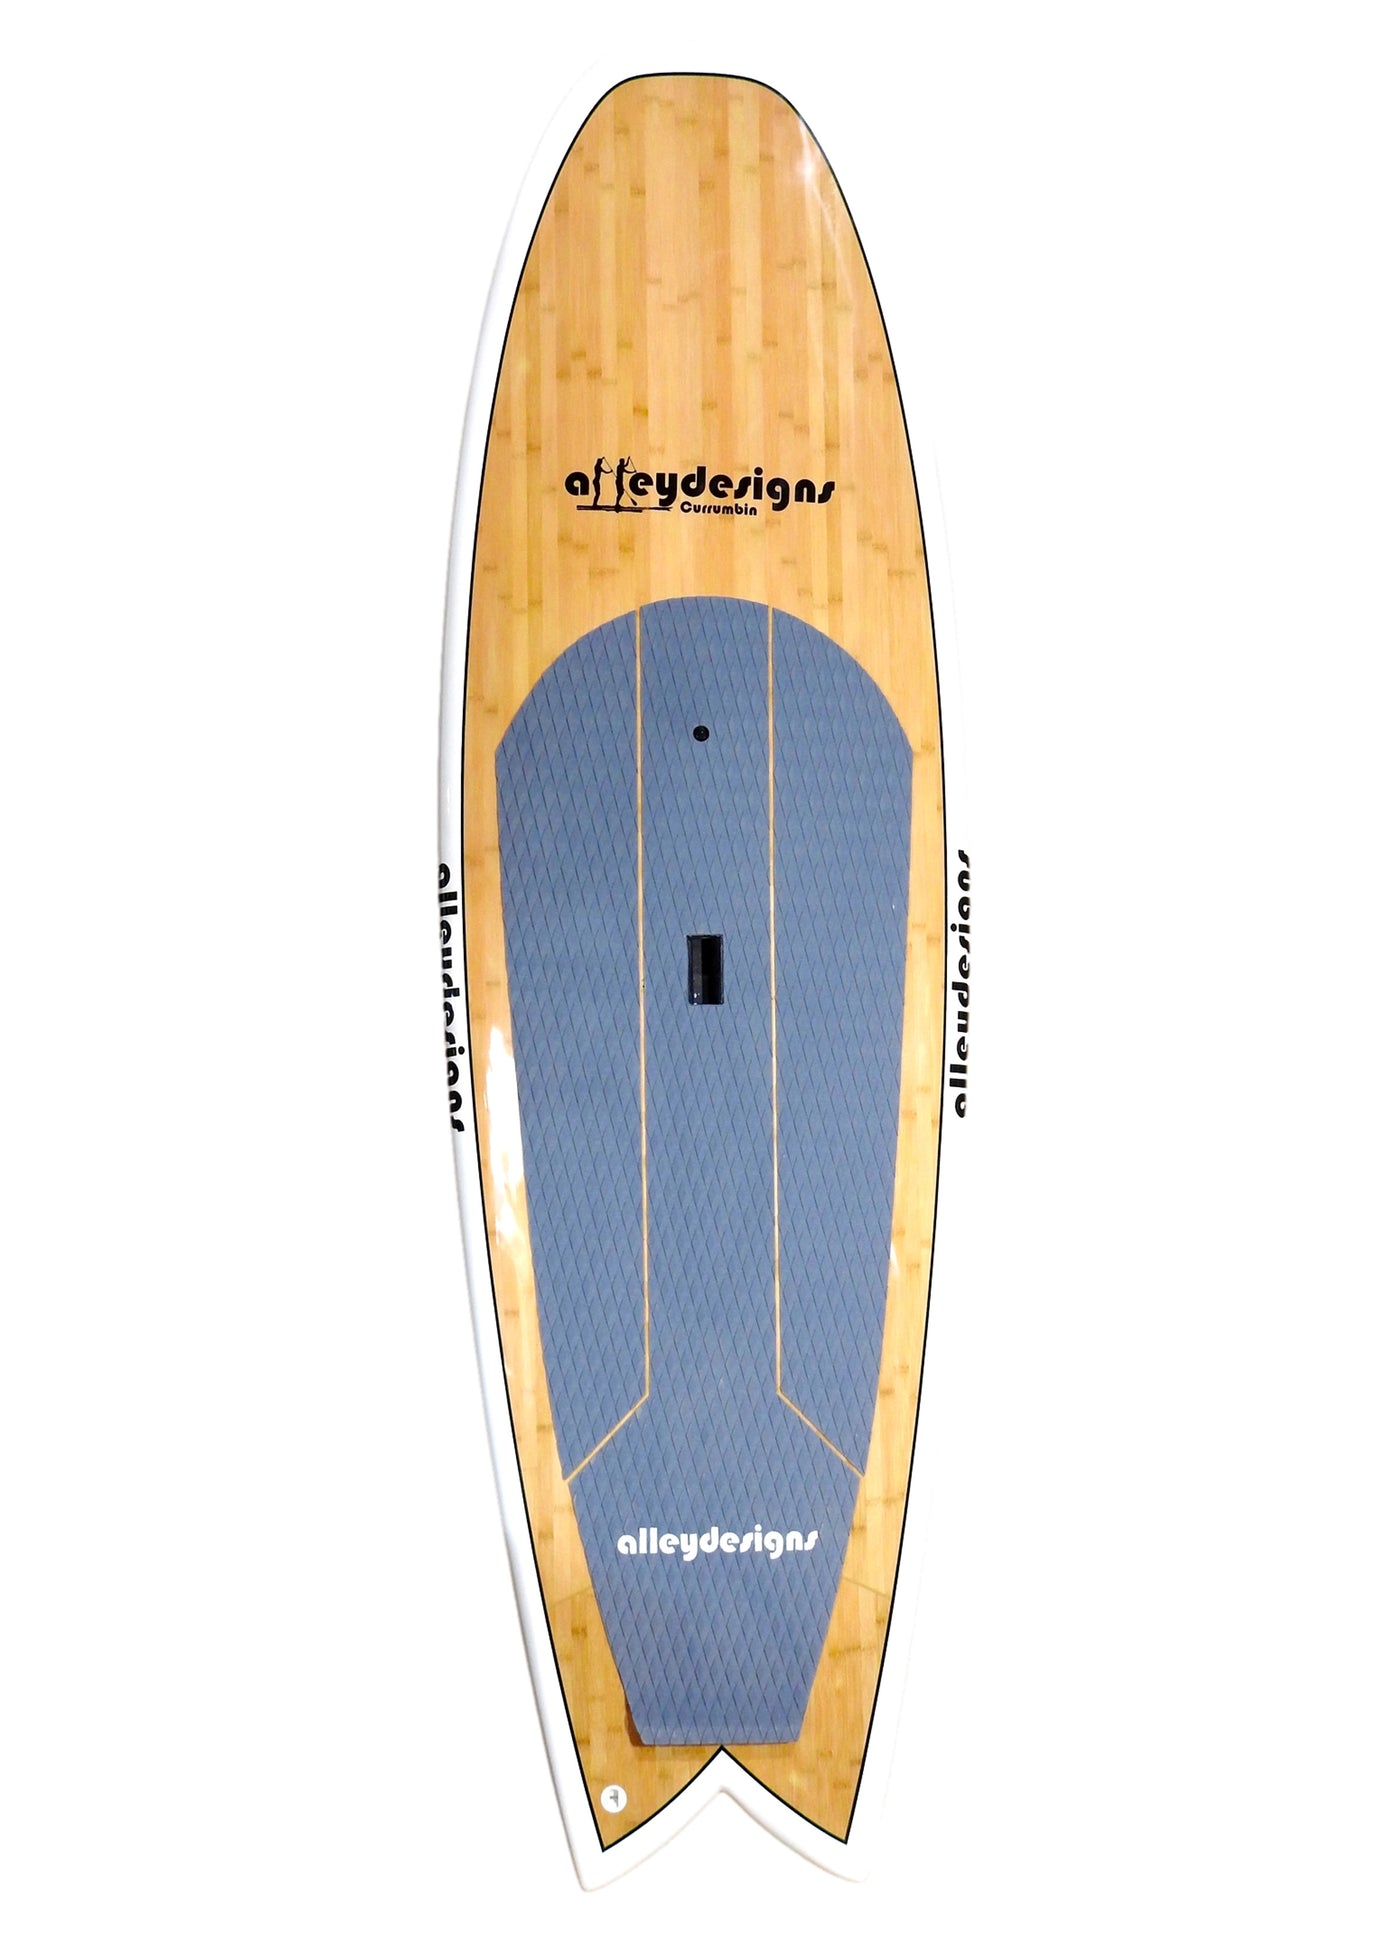 8’10” x 32” Galaxy Bounce Bamboo & White, Grey Deck Pad Surf SUP - Alleydesigns  Pty Ltd                                             ABN: 44165571264